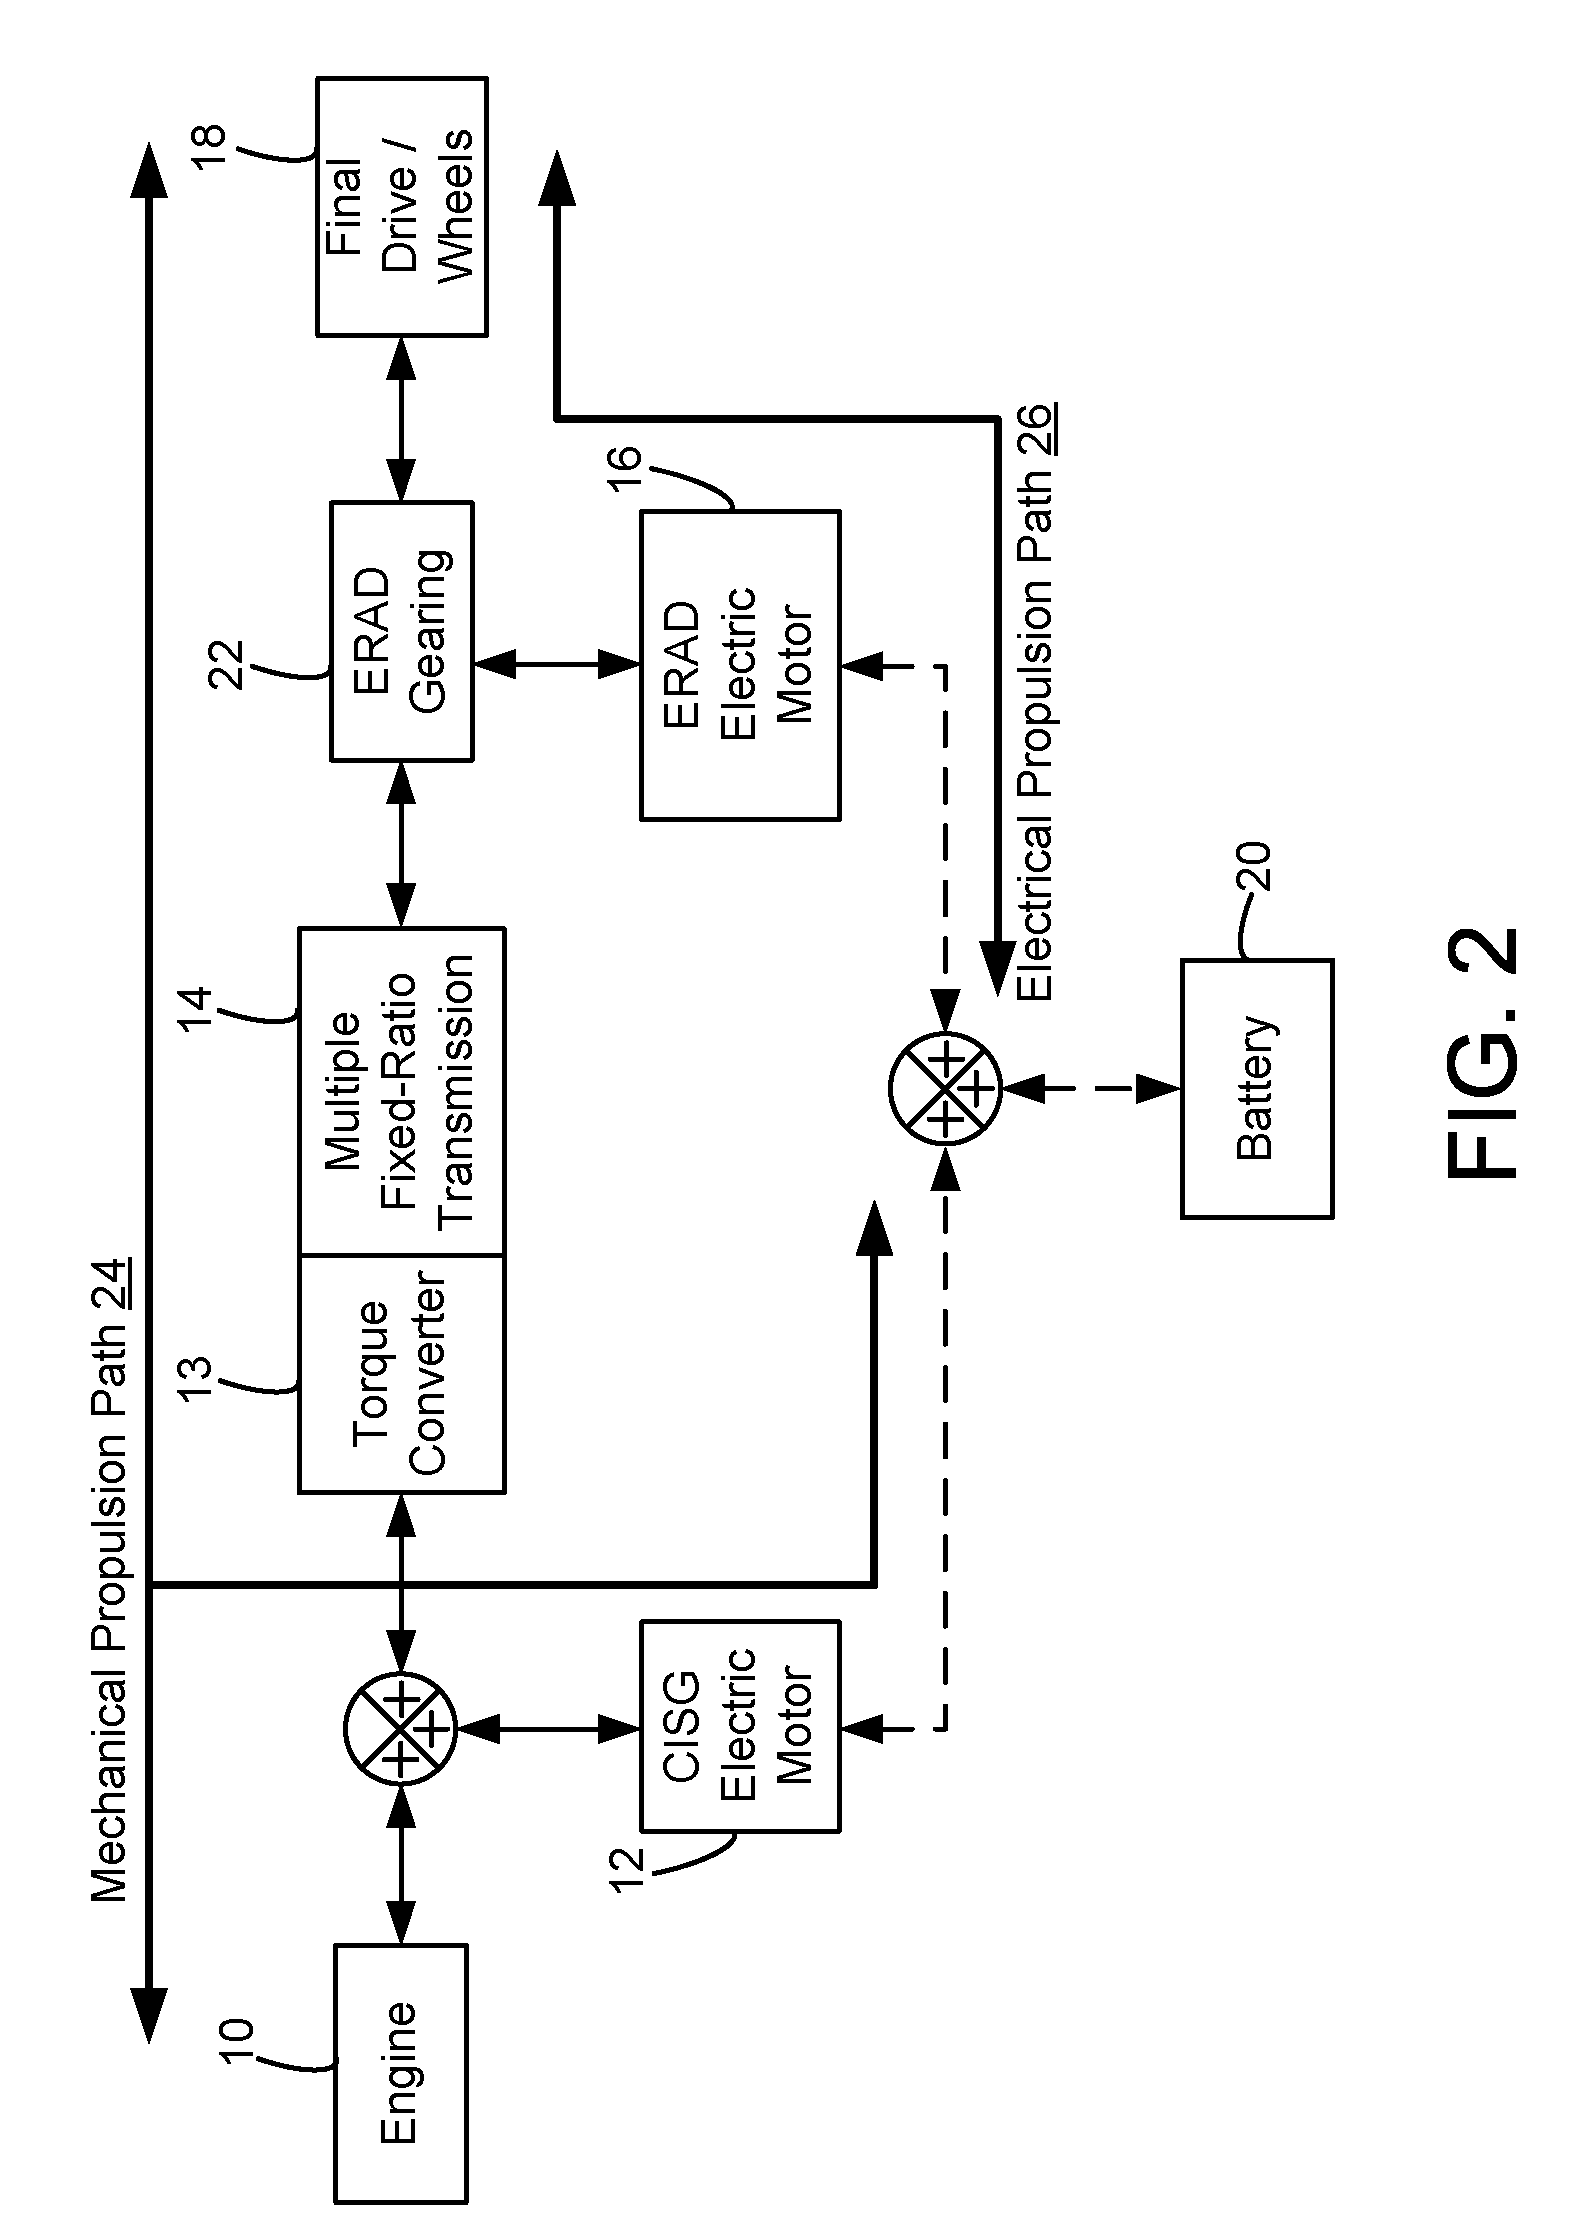 System and Method of Torque Transmission Using an Electric Energy Conversion Device